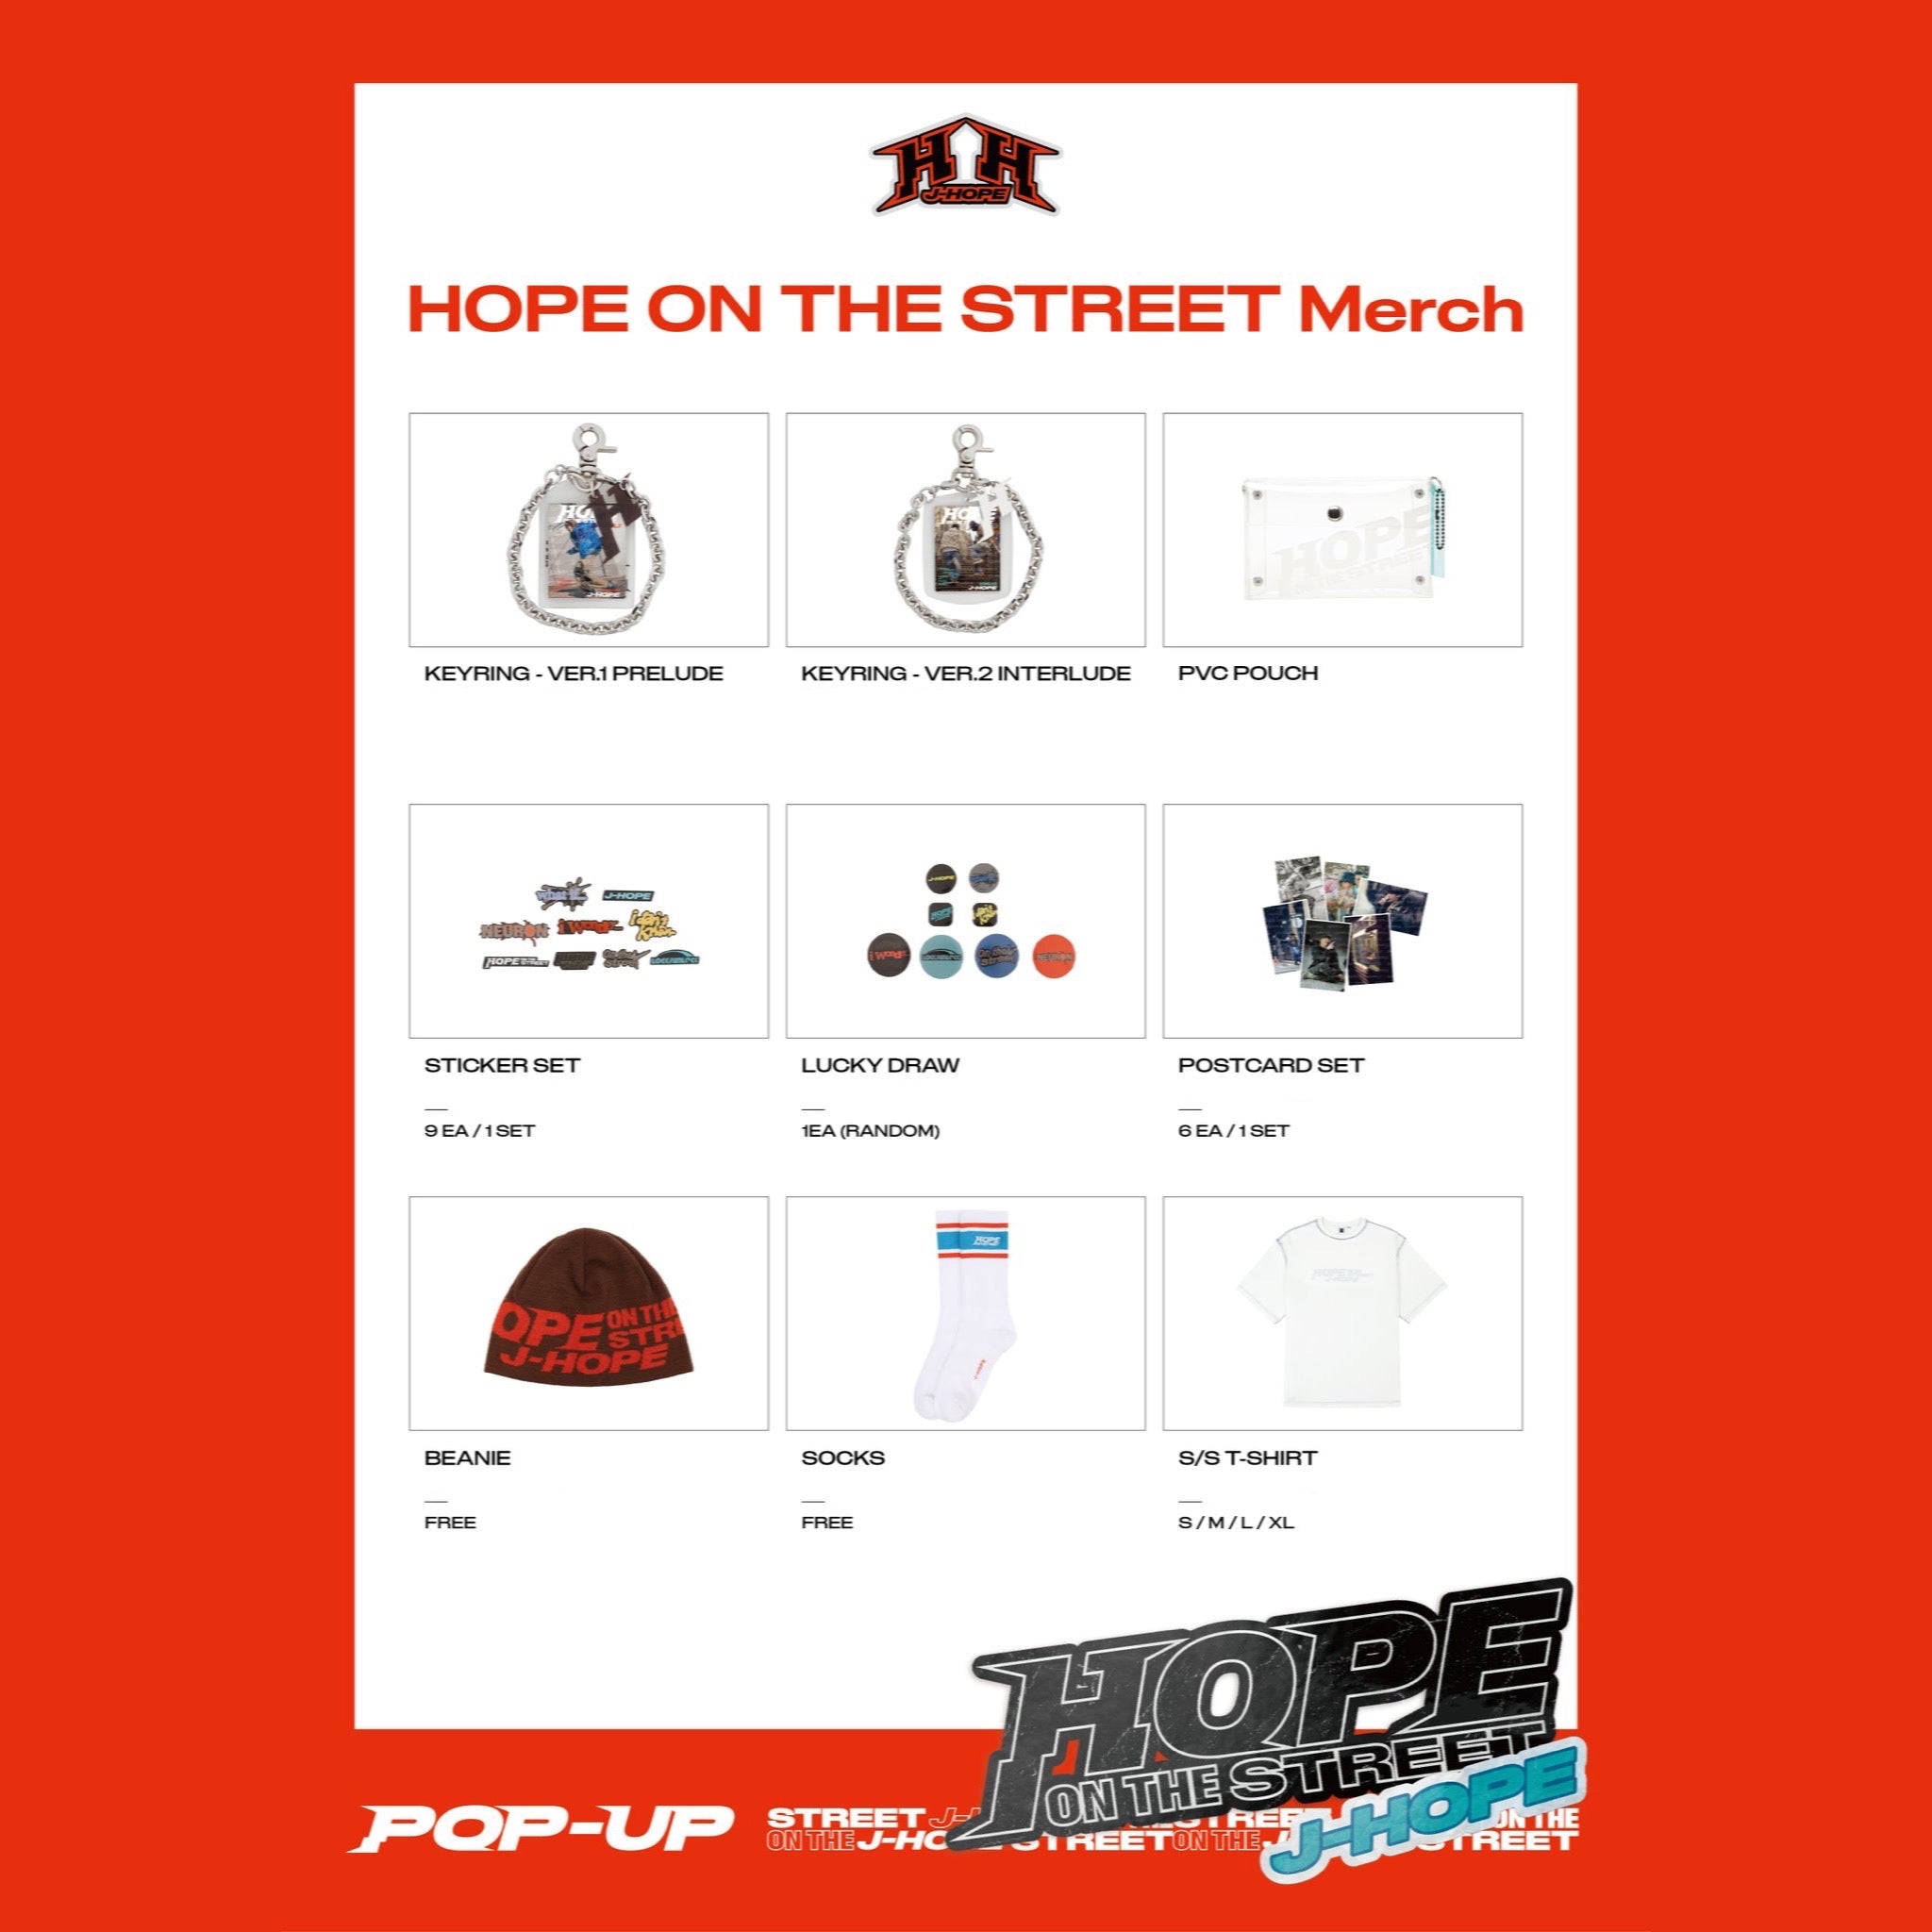 BTS J-HOPE Hope On The Street Merch Pop-Up Store Official MD – K-STAR